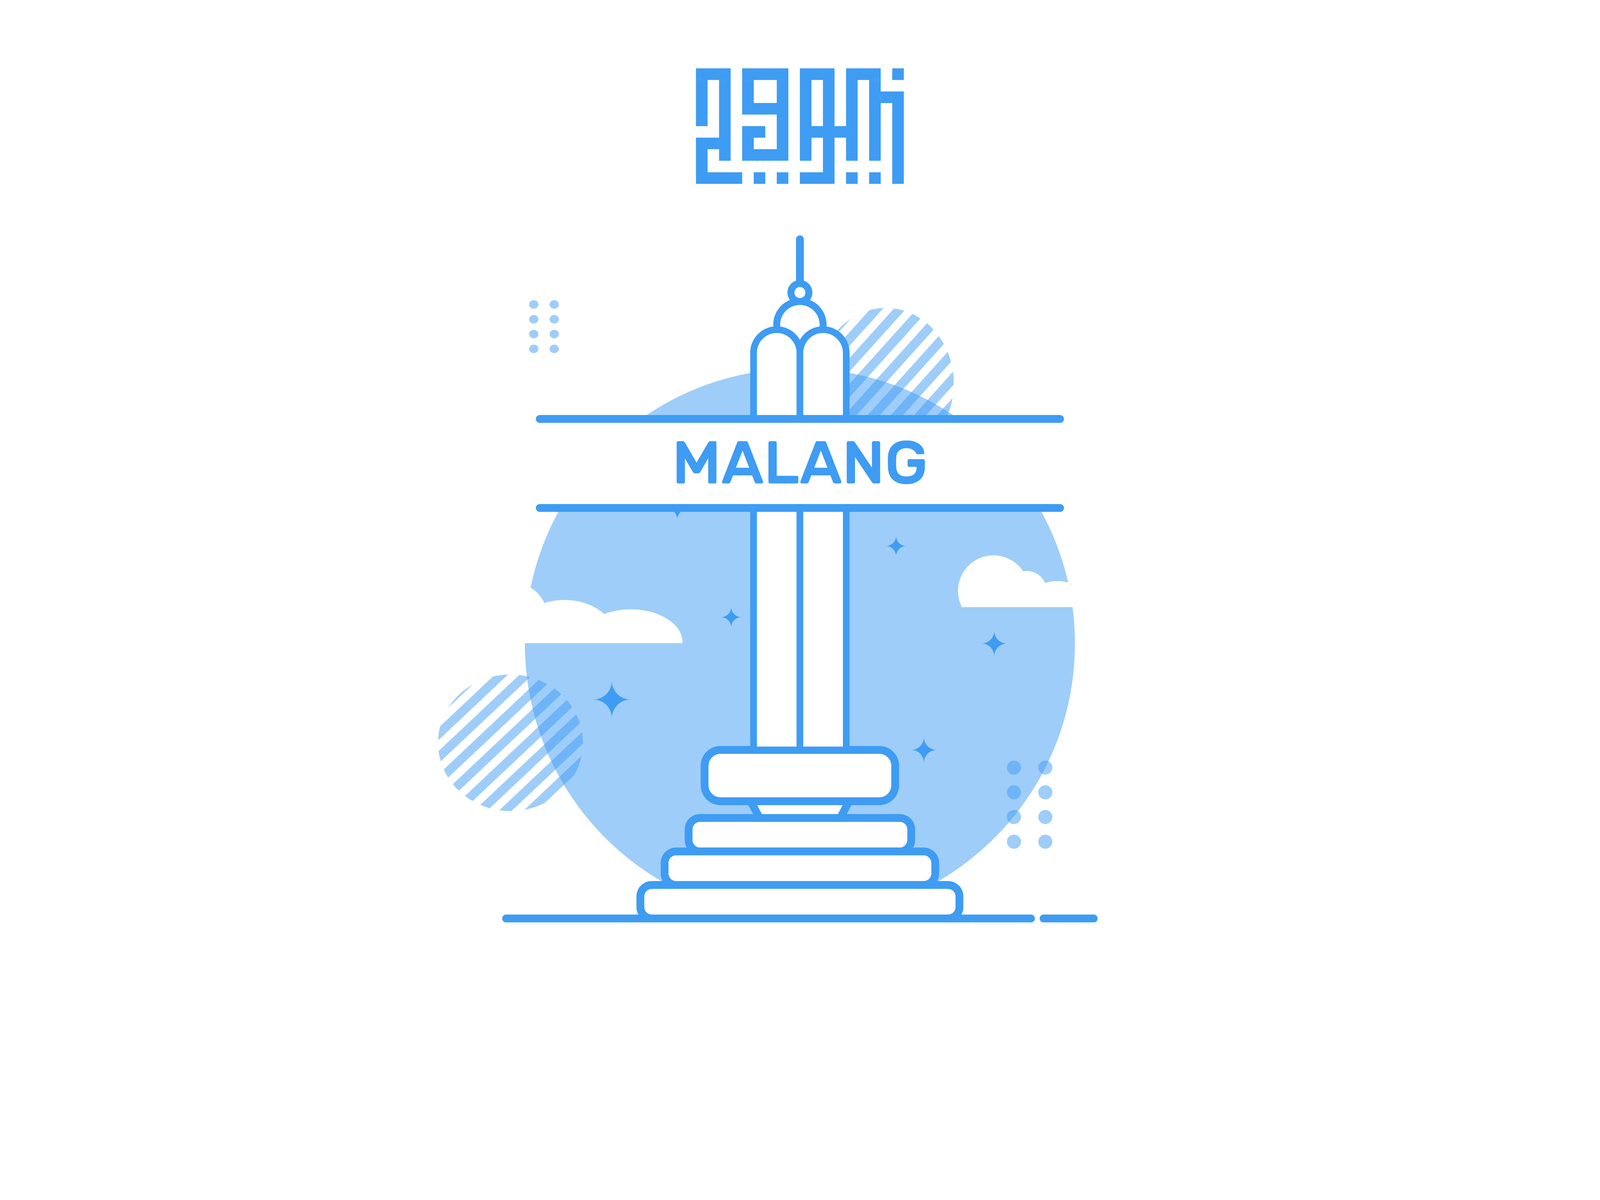 Icon Malang by Agam on Dribbble